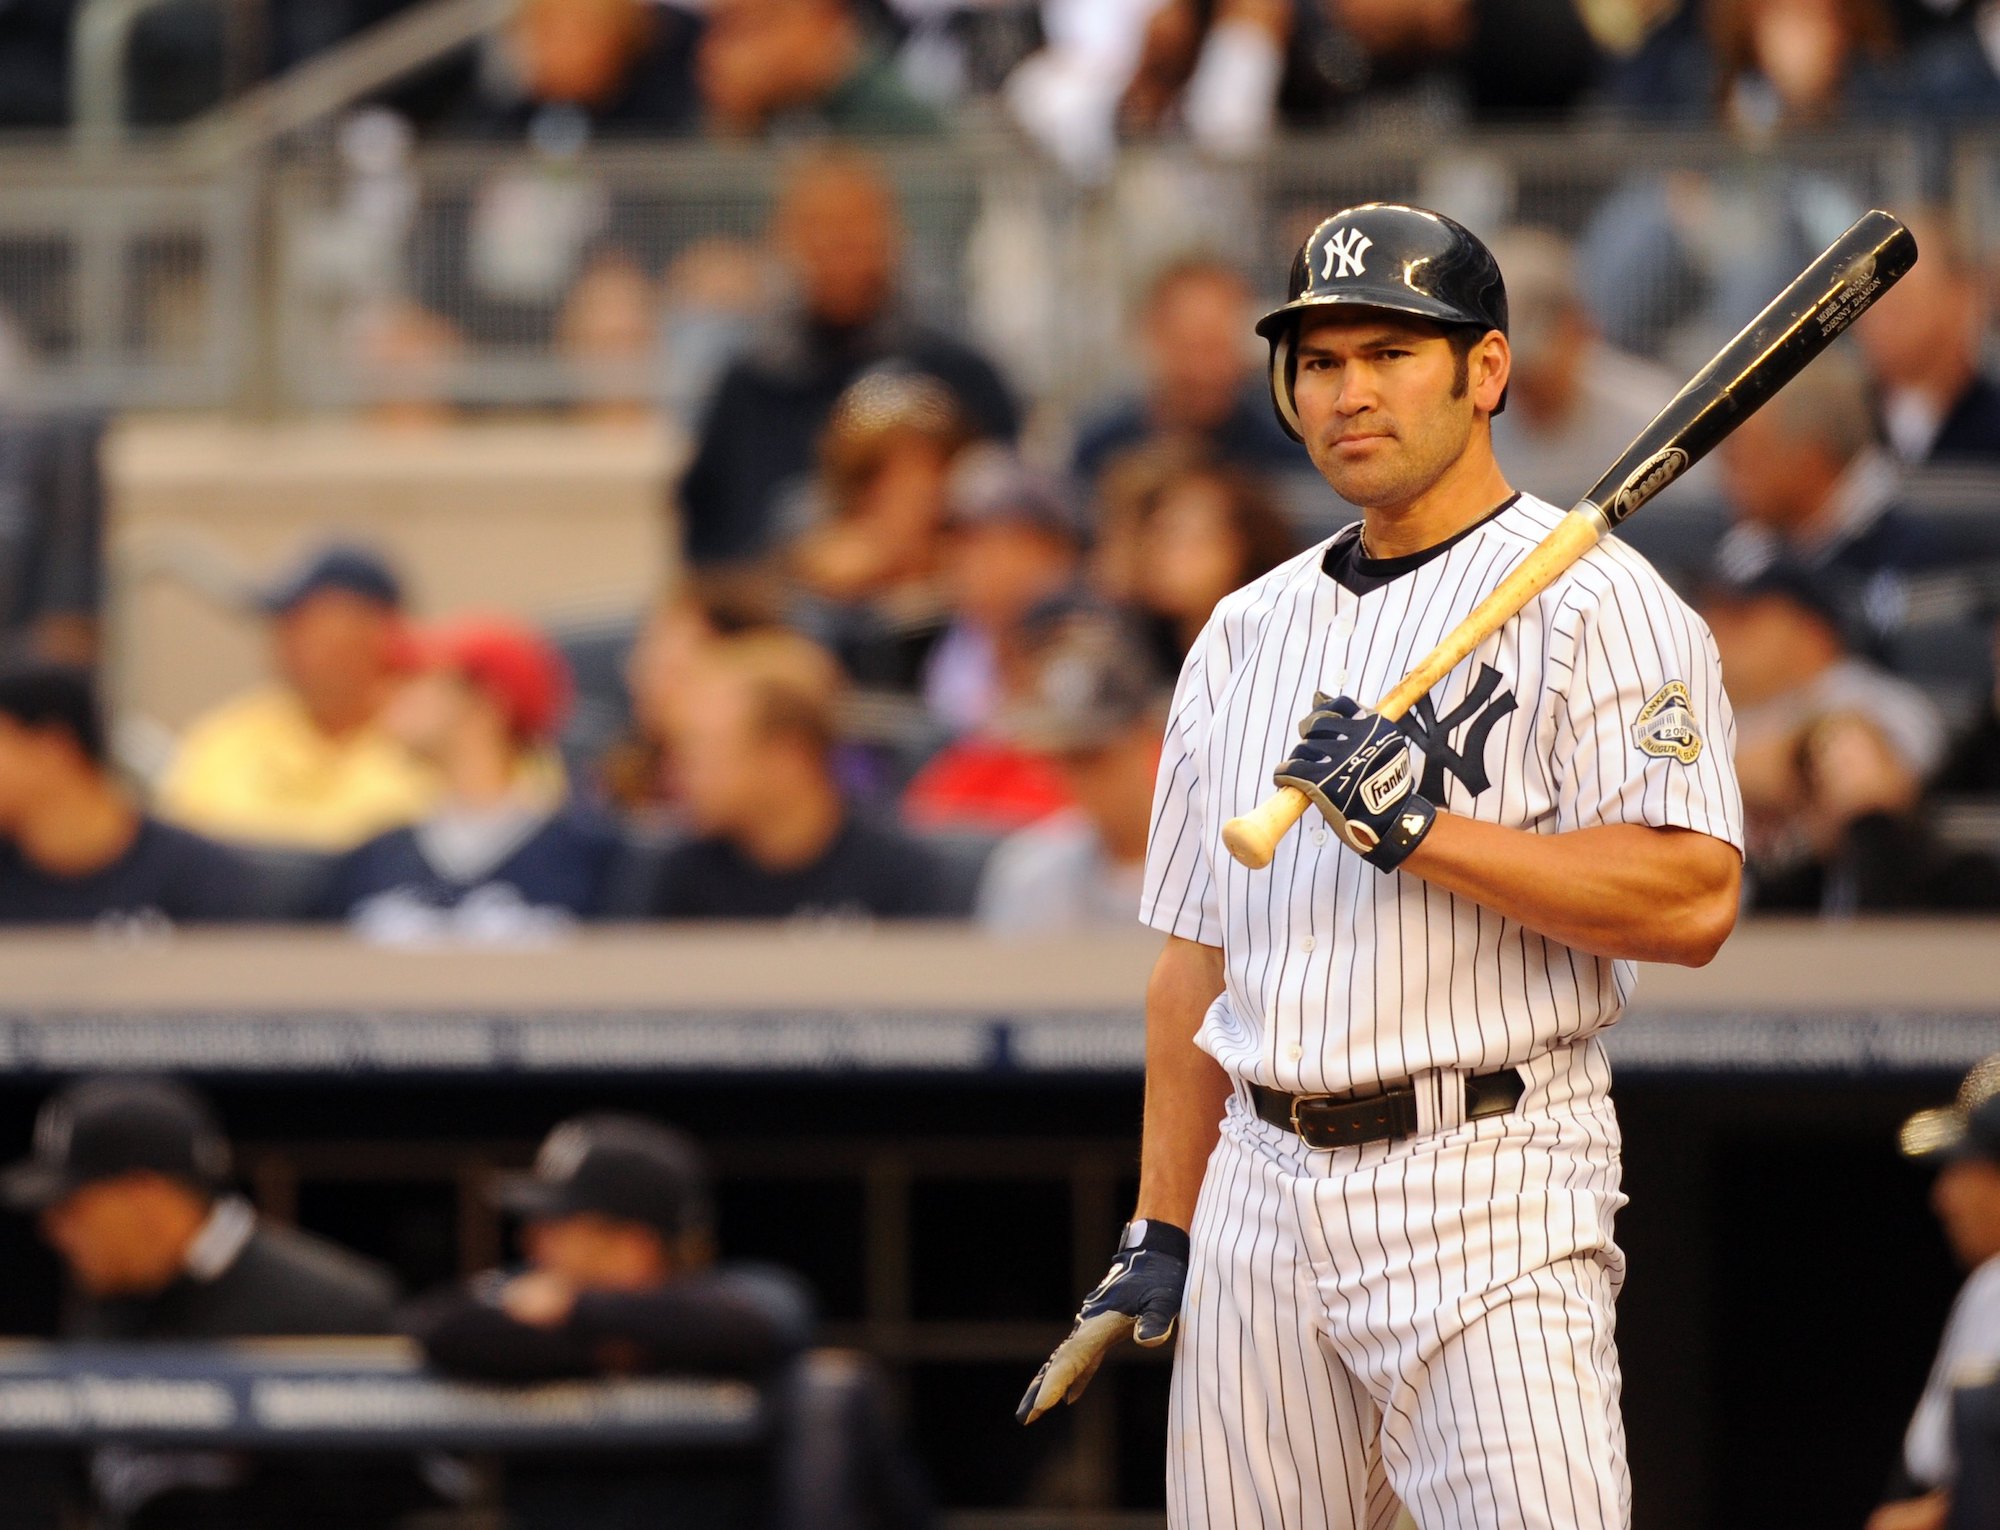 Johnny Damon Just Threw Some Serious Shade at the Boston Red Sox